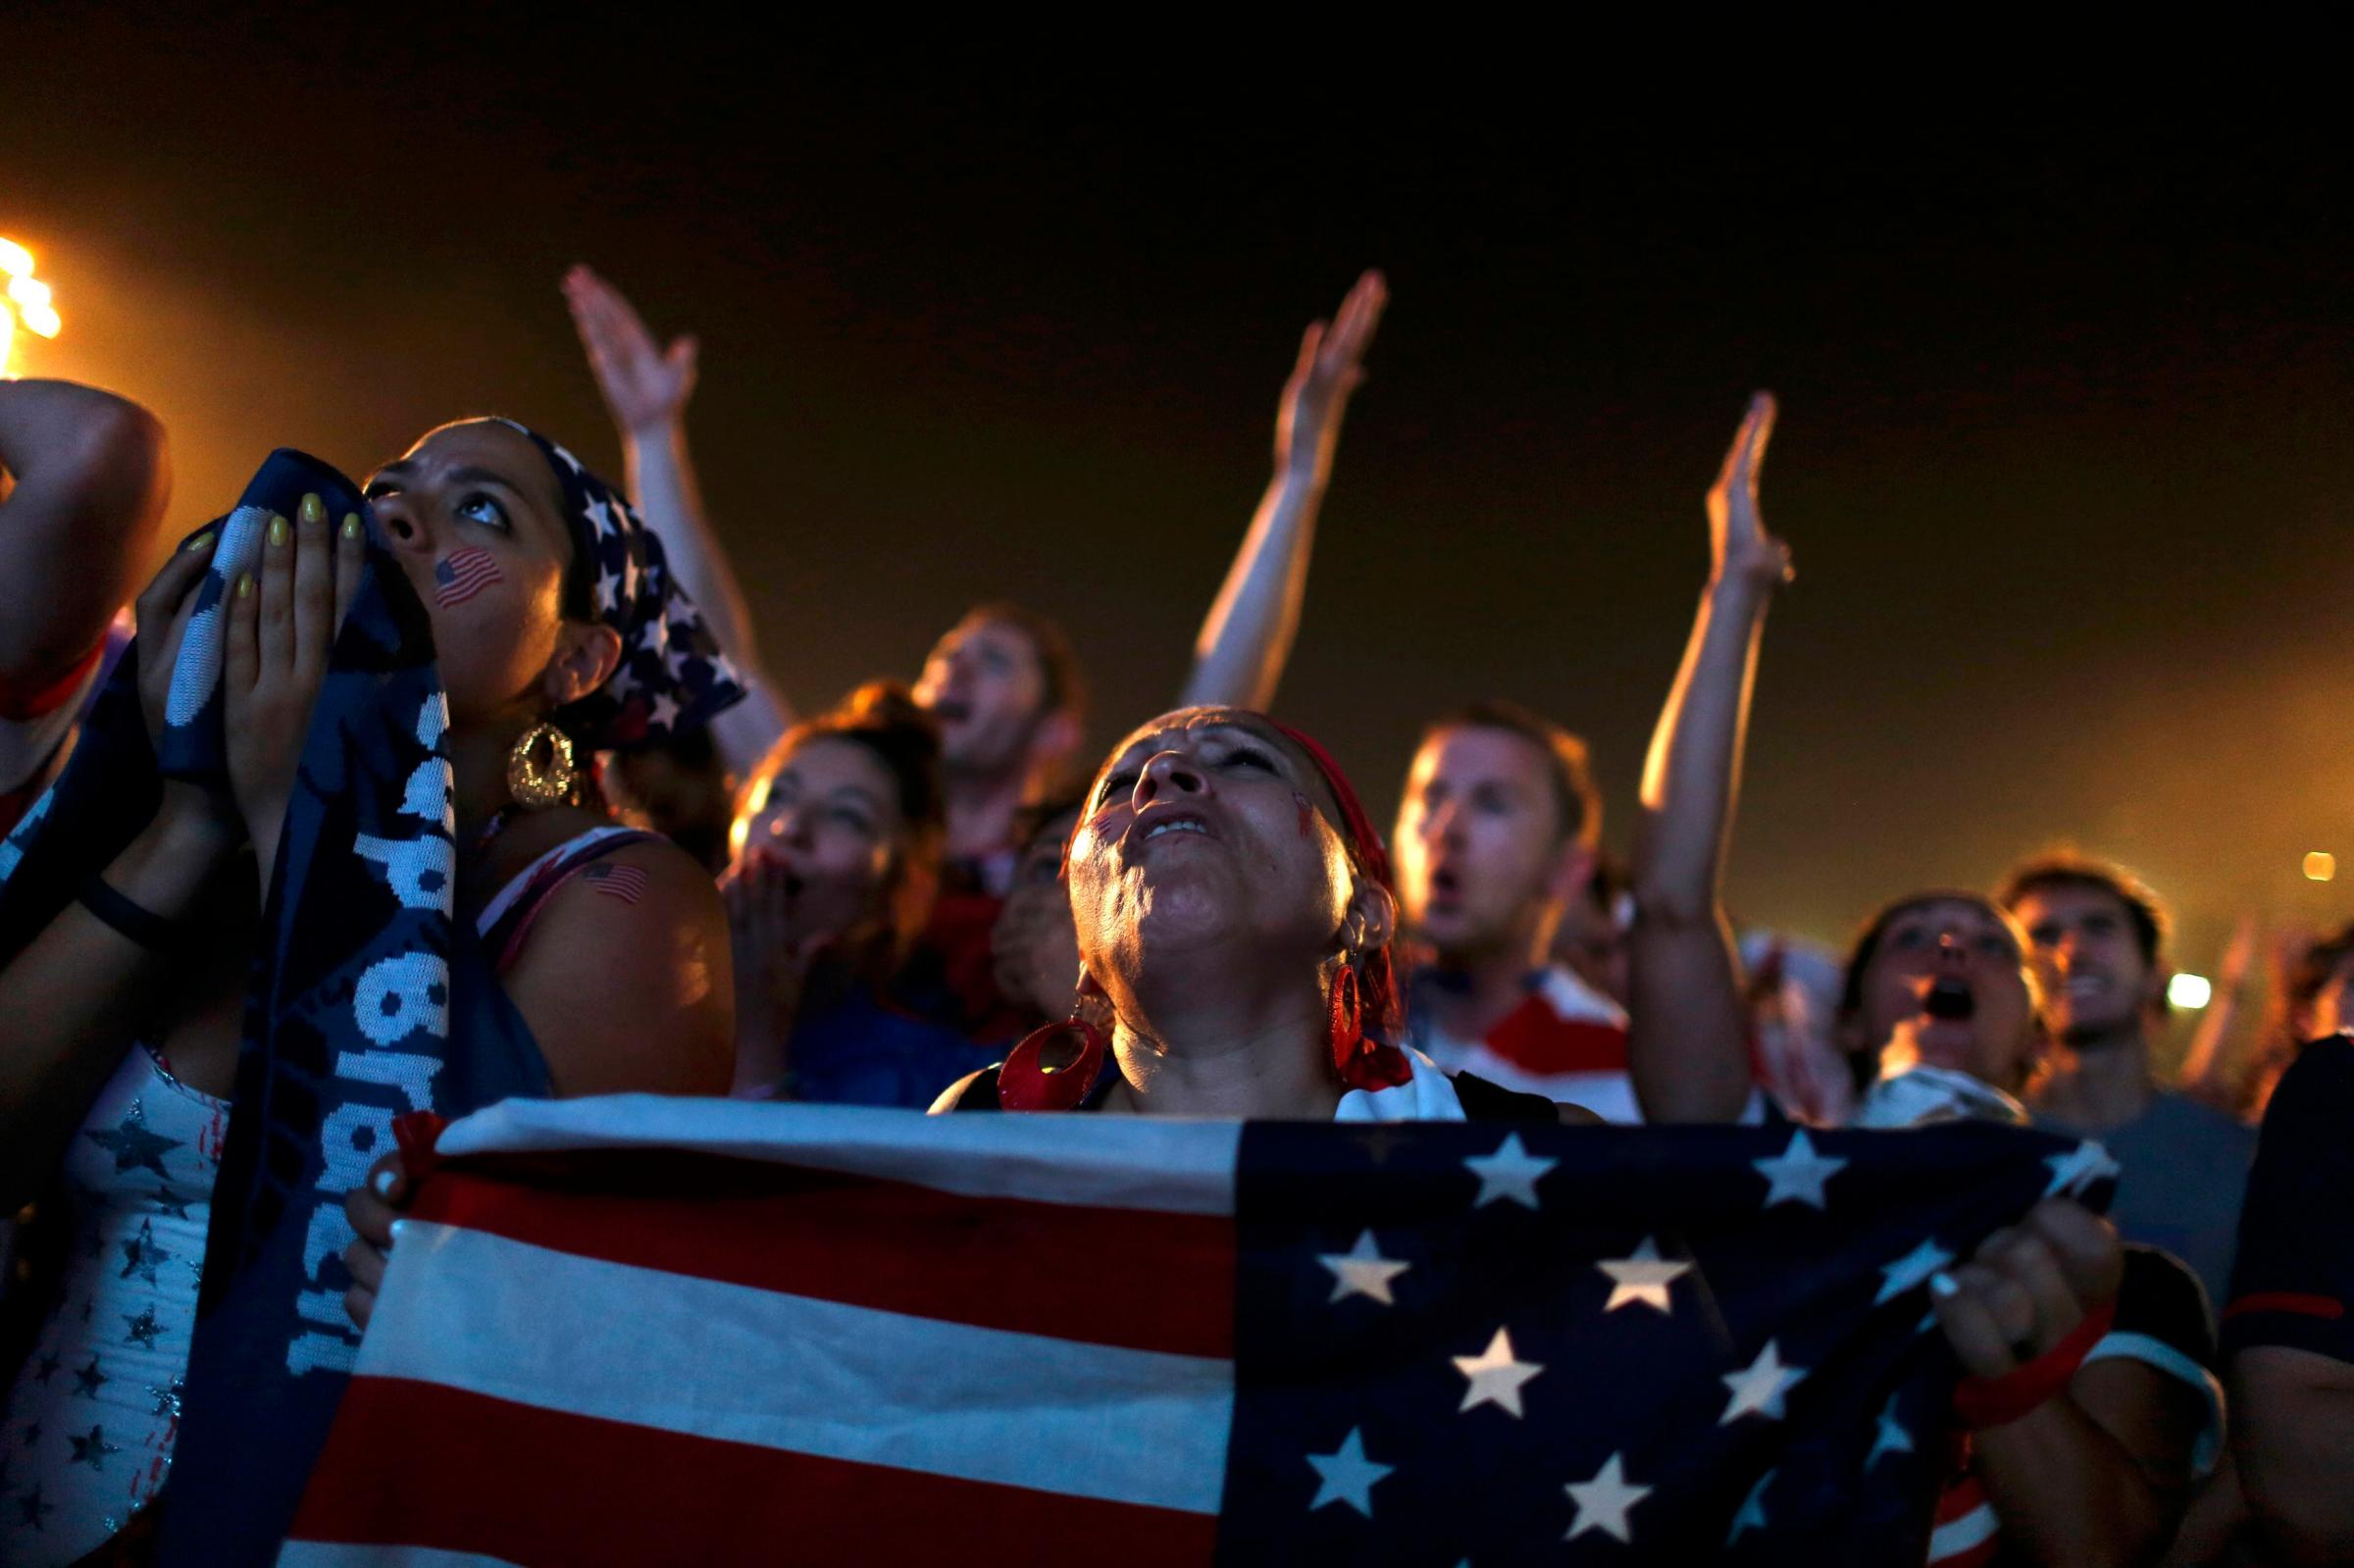 U.S. fans react as they watch the 2014 World Cup soccer match between U.S. and Ghana on a large screen at Copacabana beach in Rio de Janeiro on June 16, 2014.